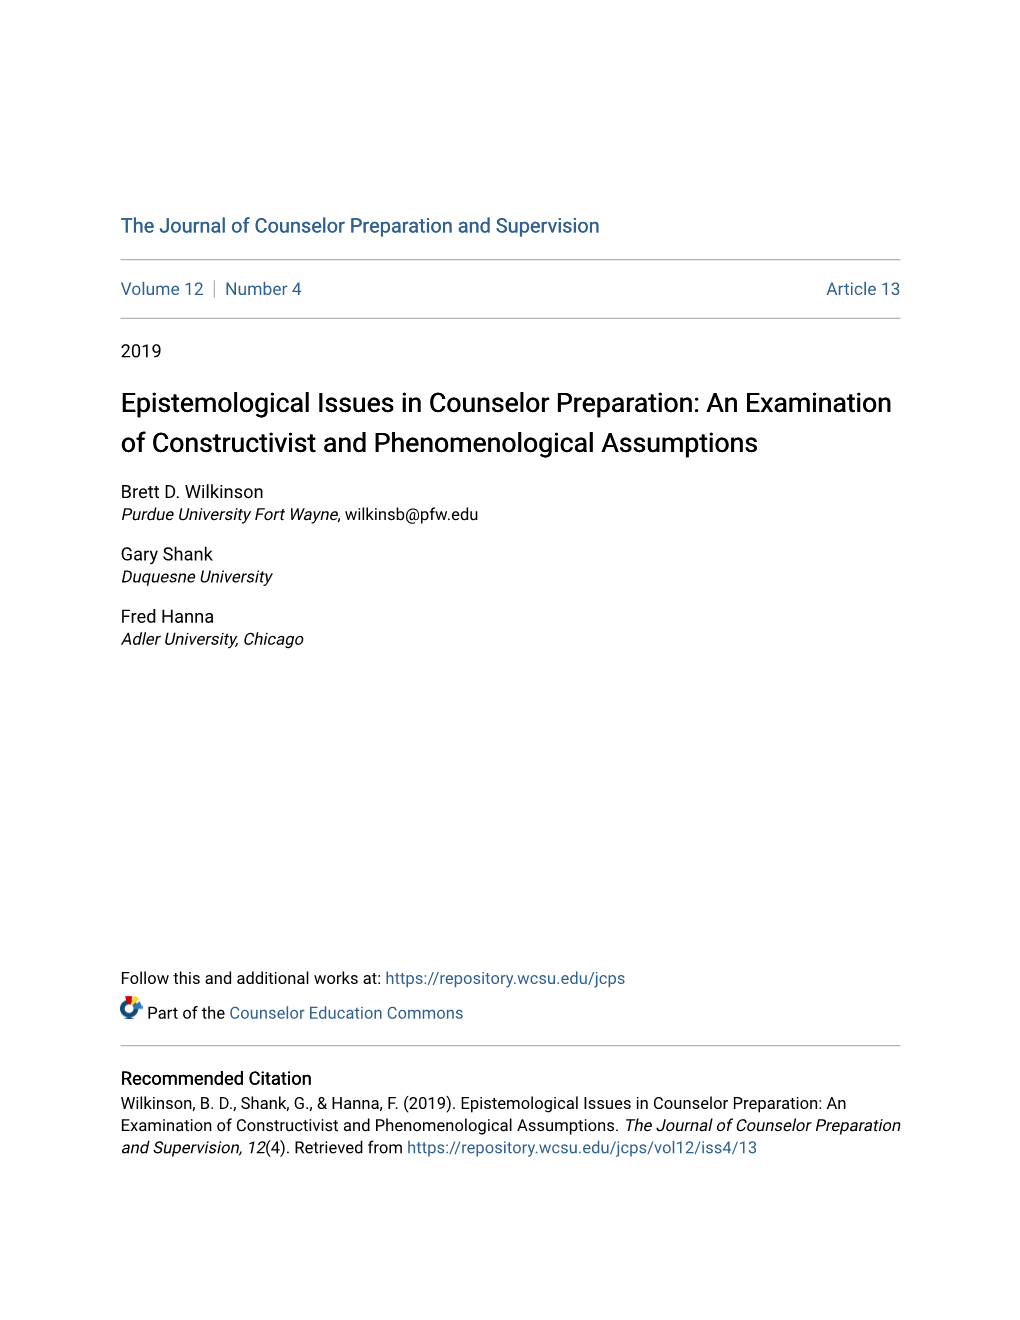 Epistemological Issues in Counselor Preparation: an Examination of Constructivist and Phenomenological Assumptions